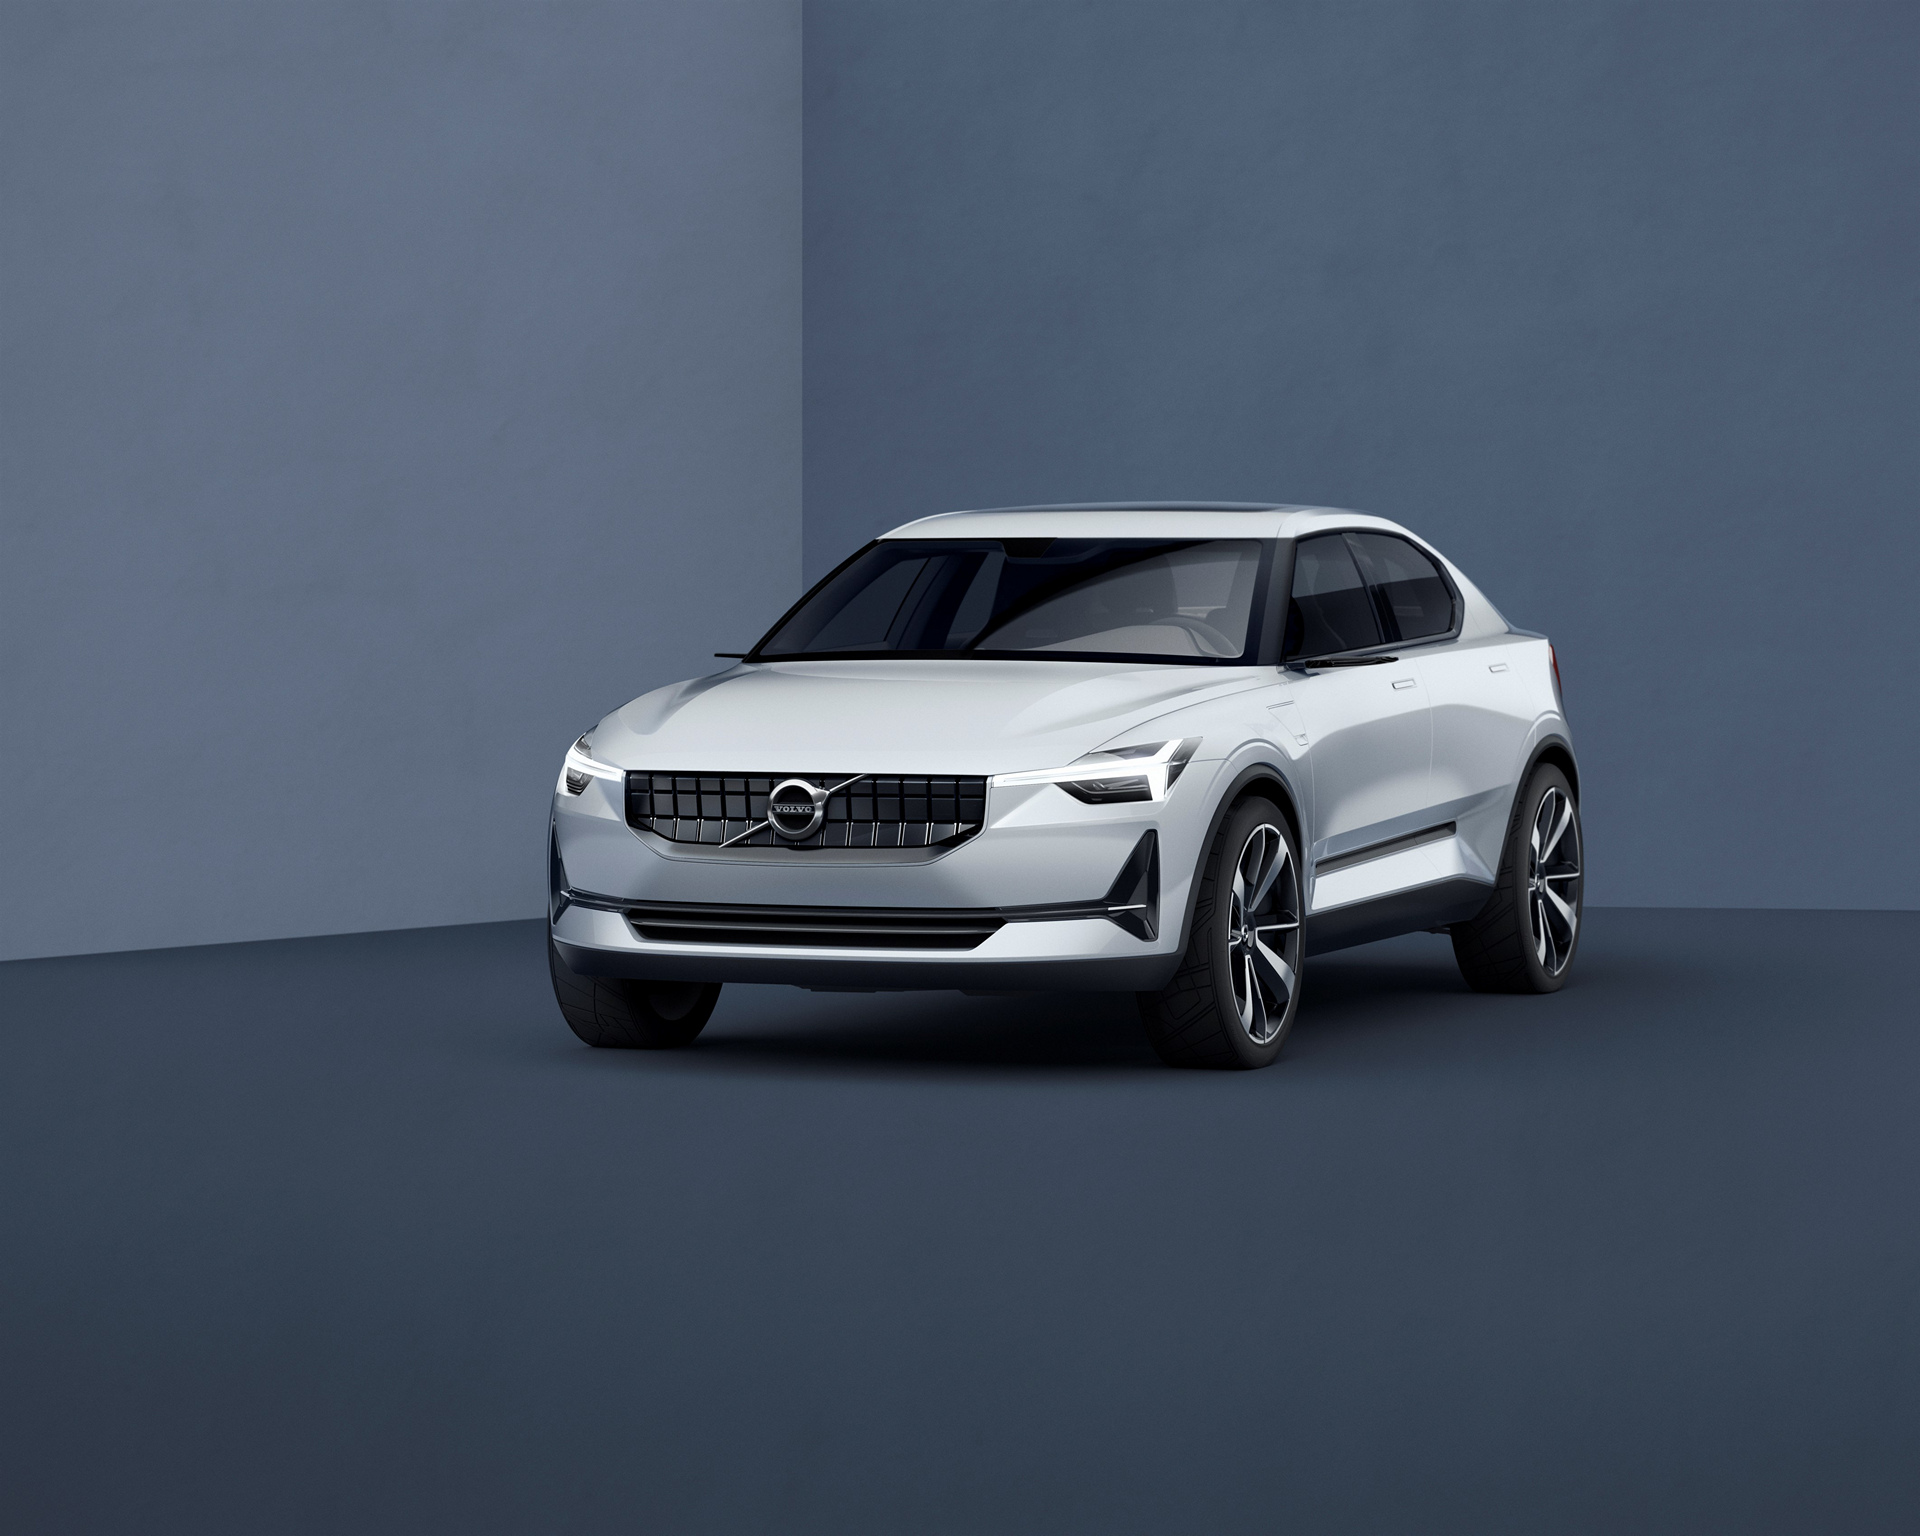 Volvo Concept 40.2 © Zhejiang Geely Holding Group Co., Ltd